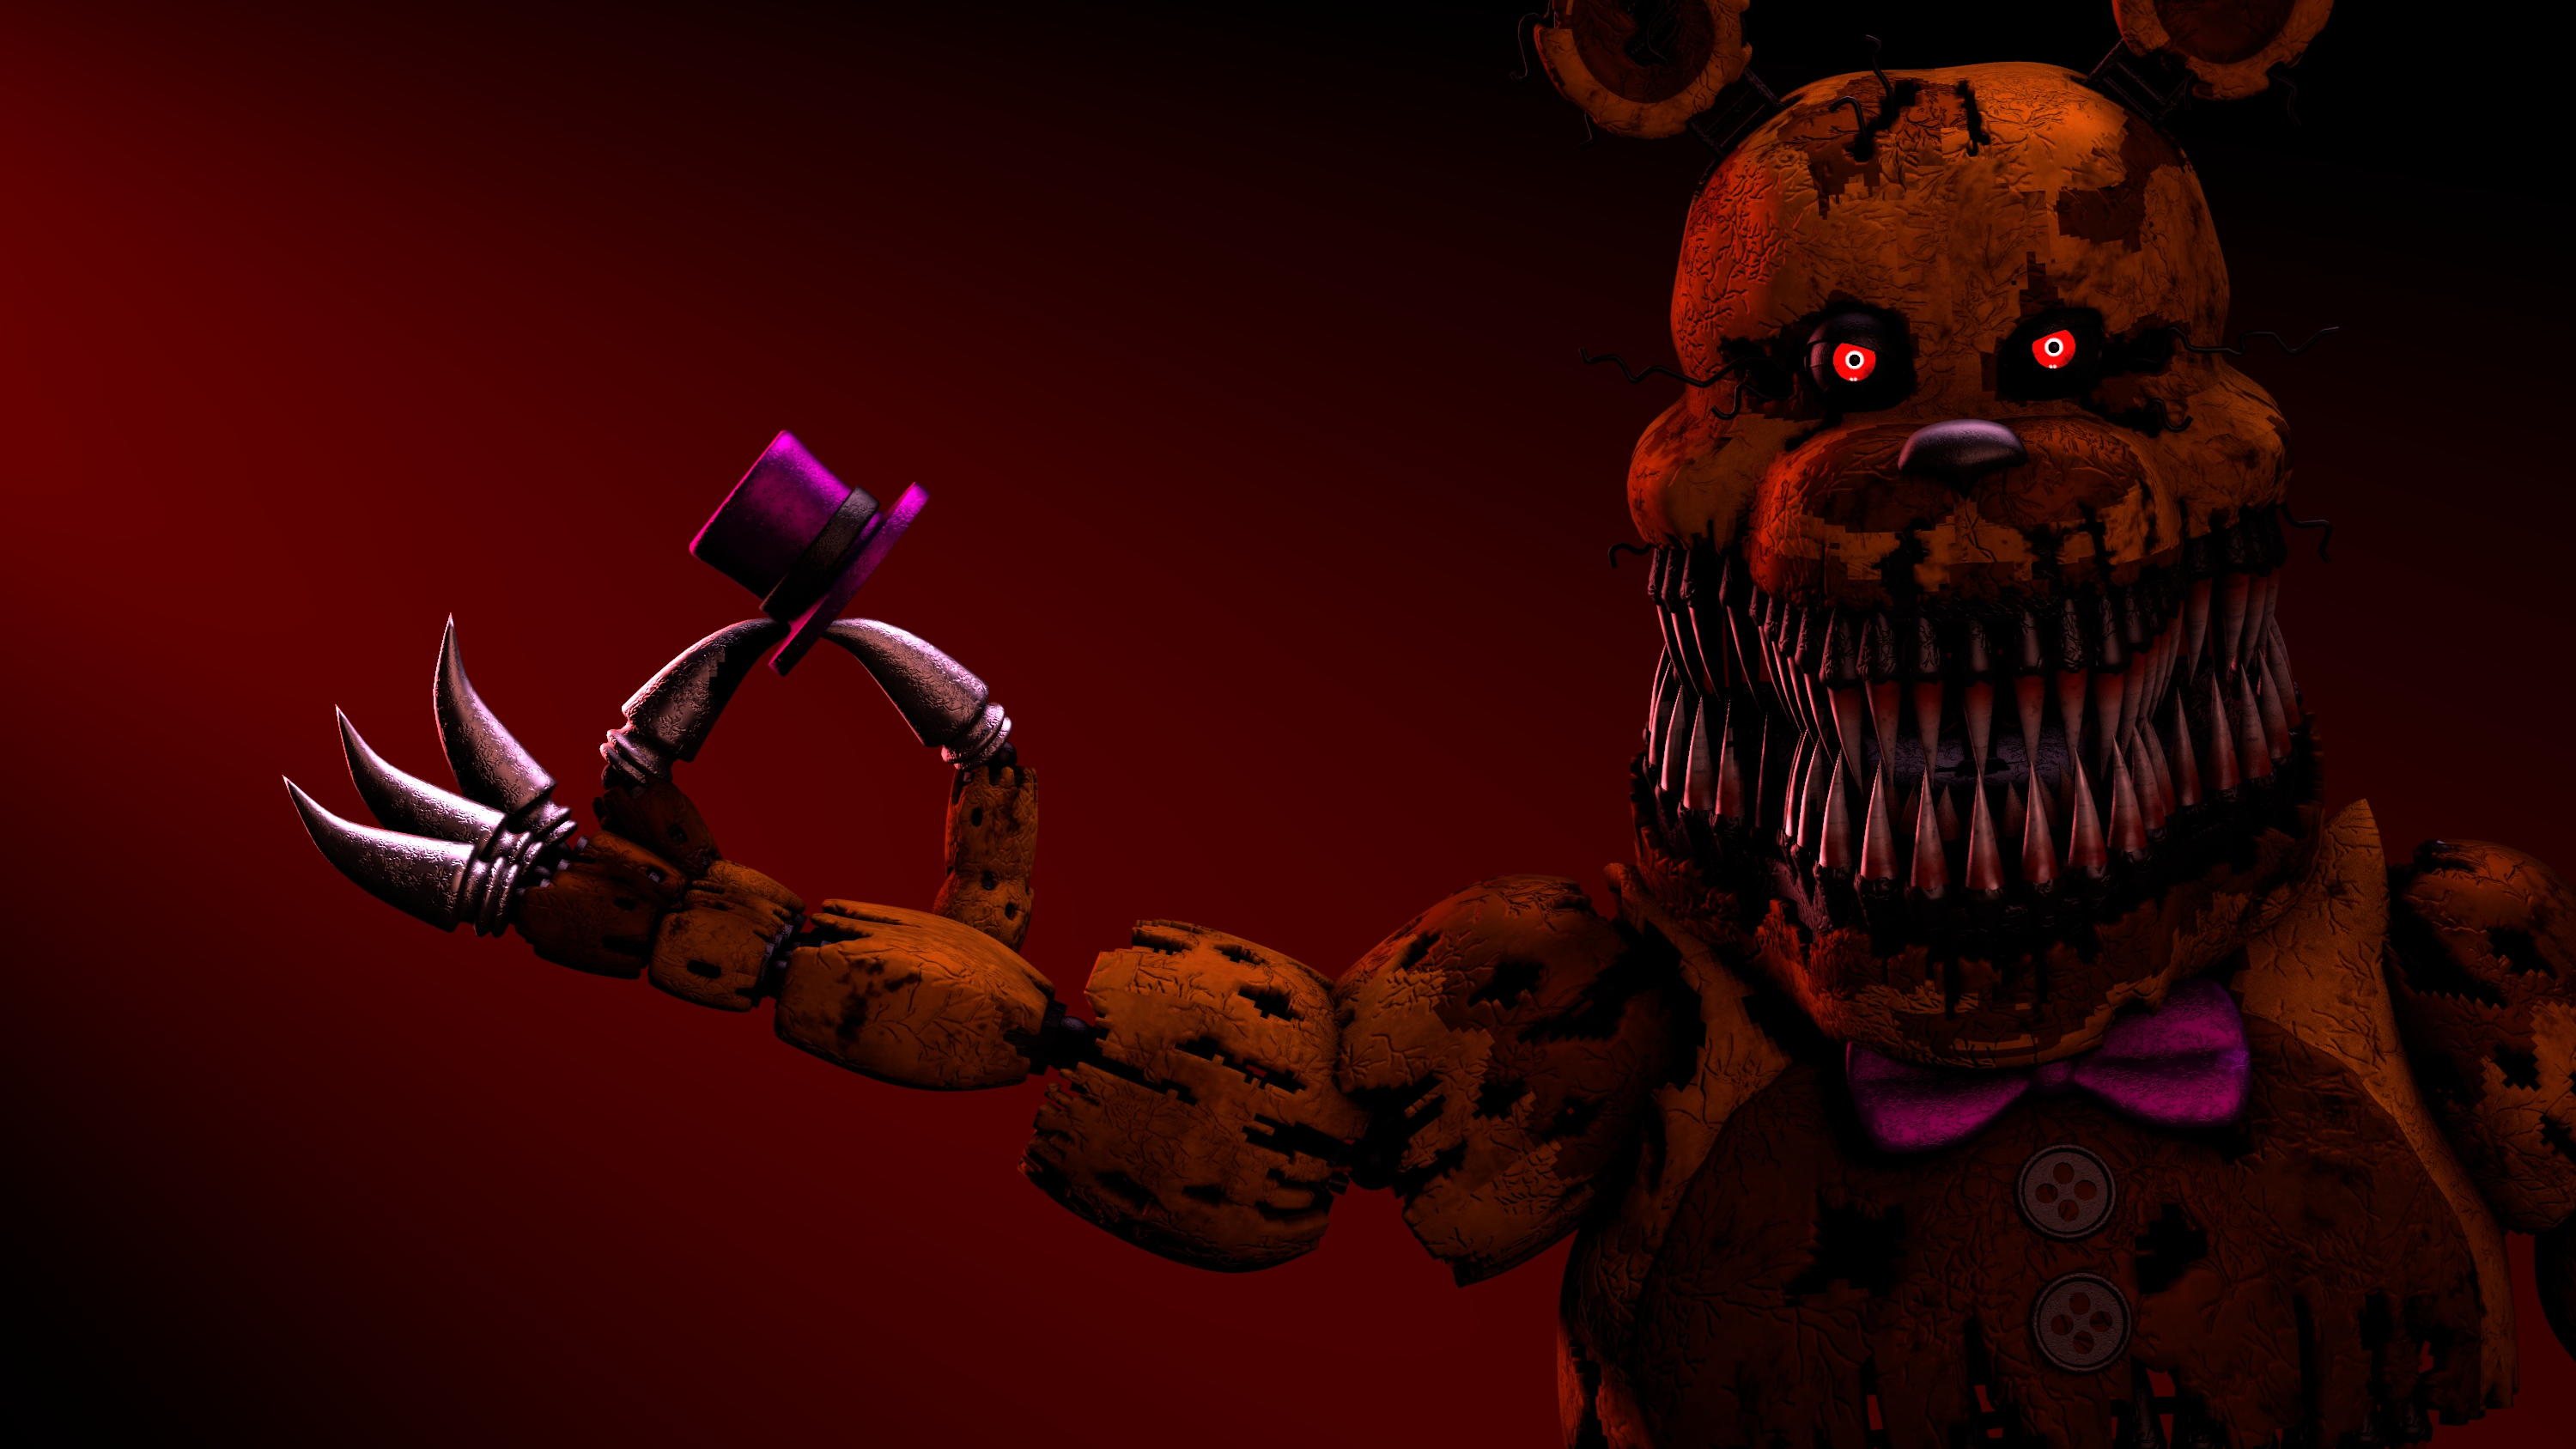 five nights at freddy's 4, video game, five nights at freddy's